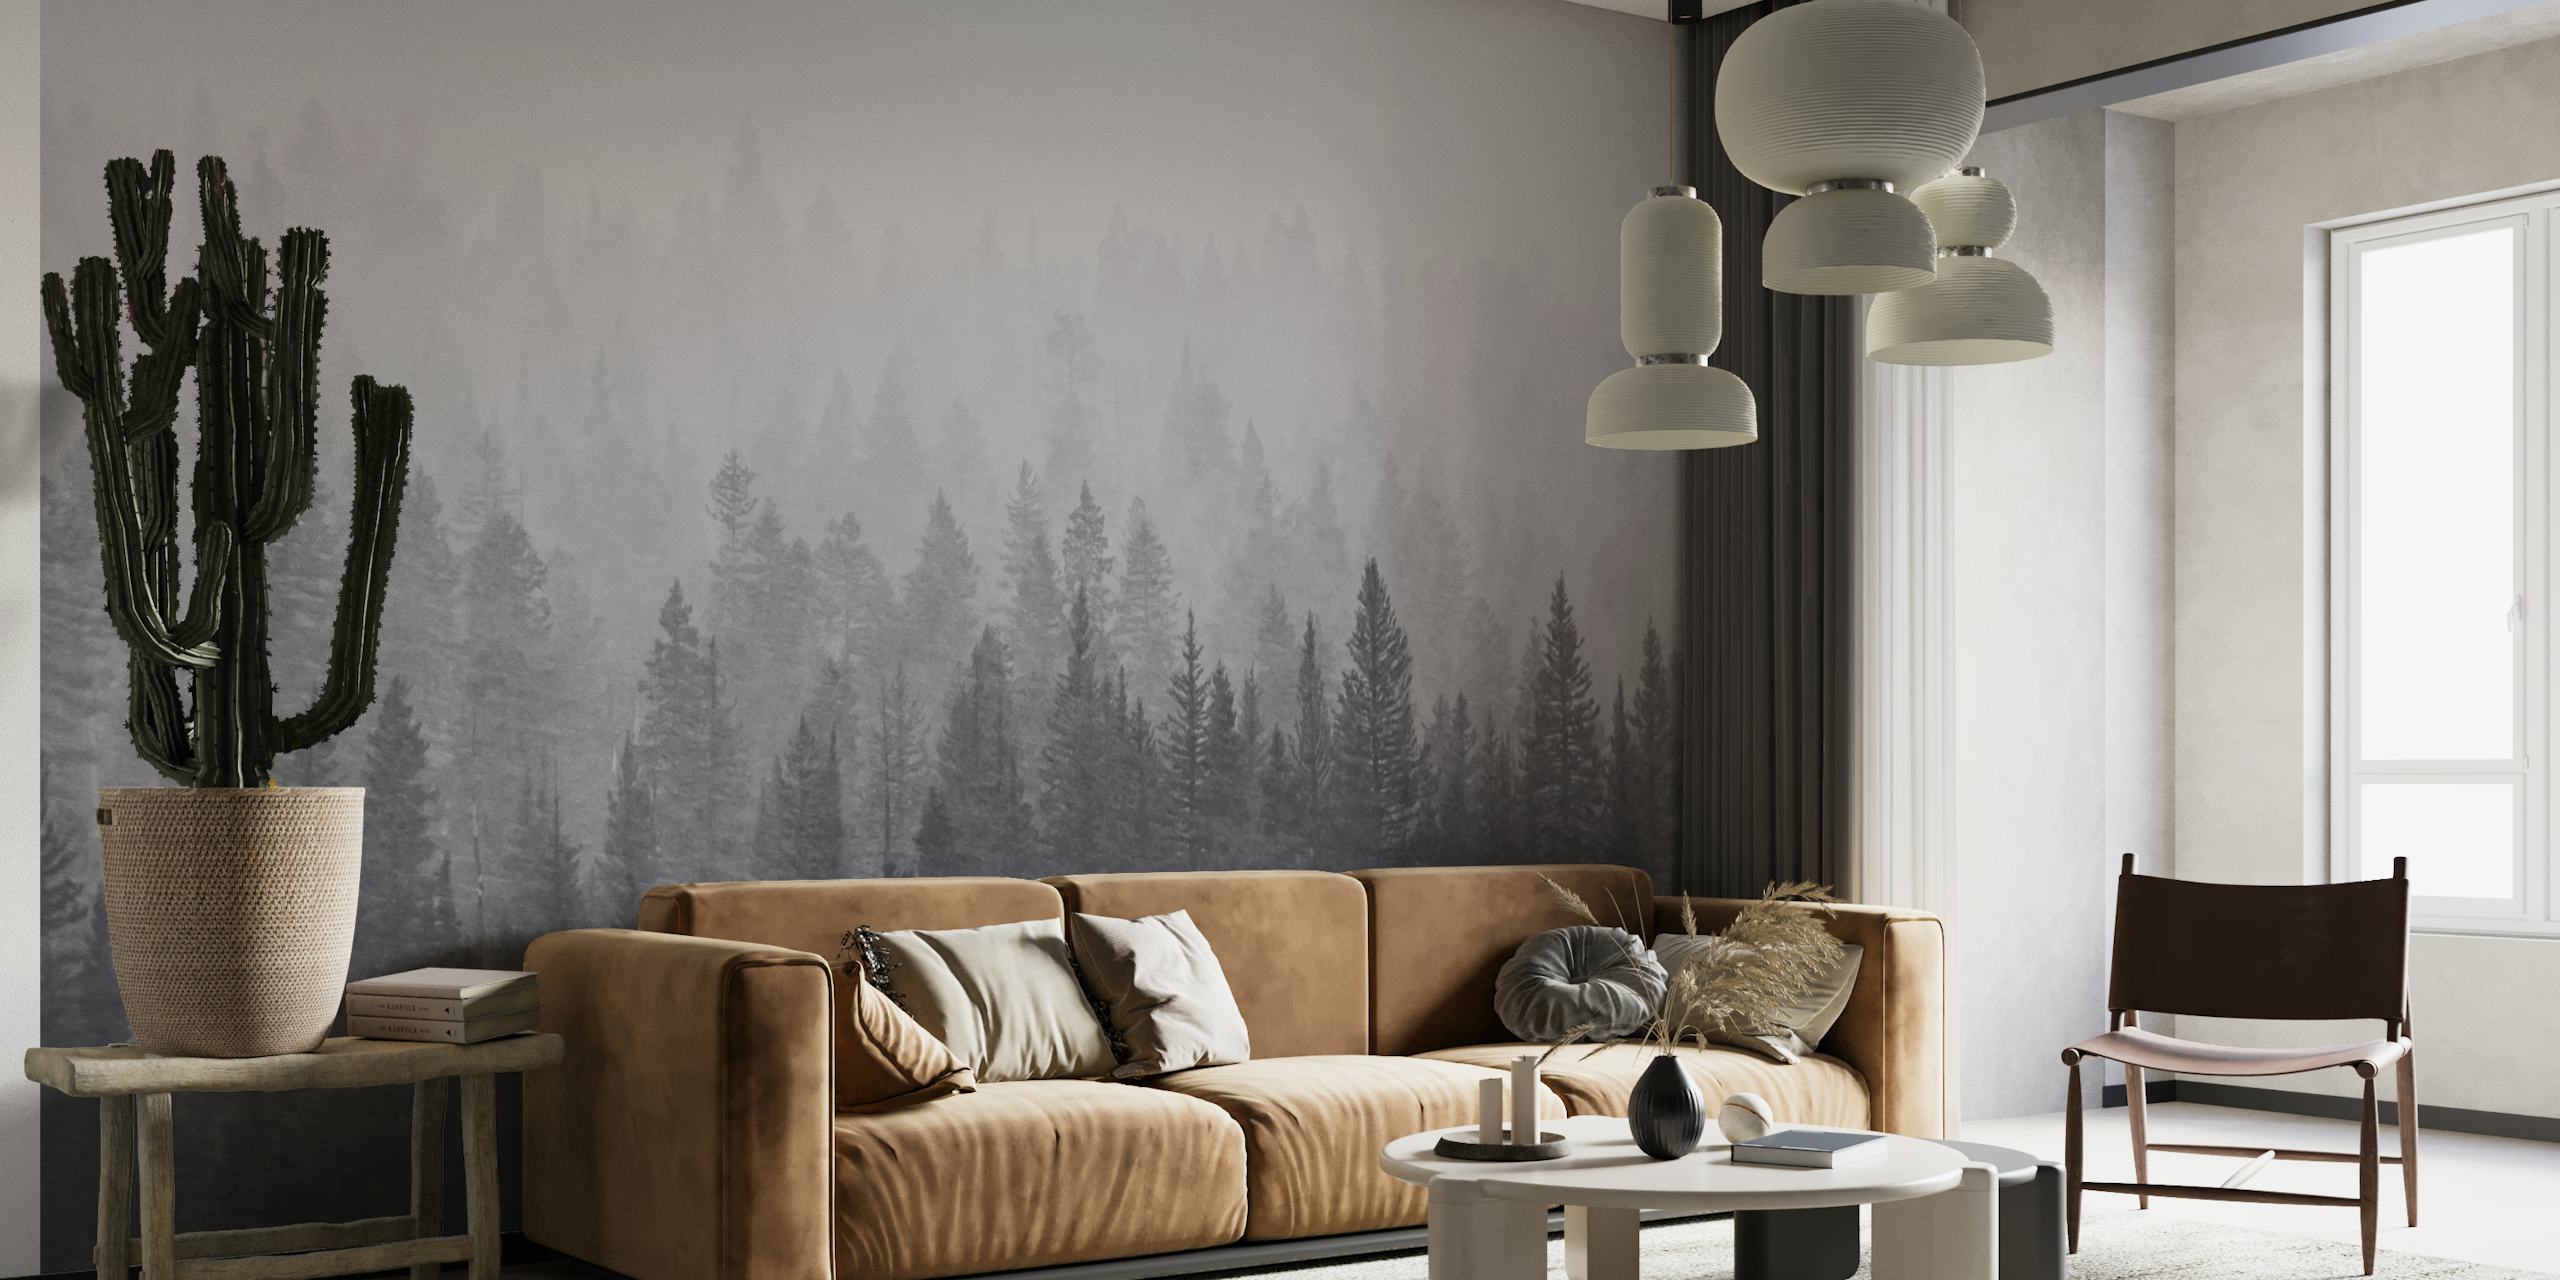 Misty Forest - Black and White papel pintado